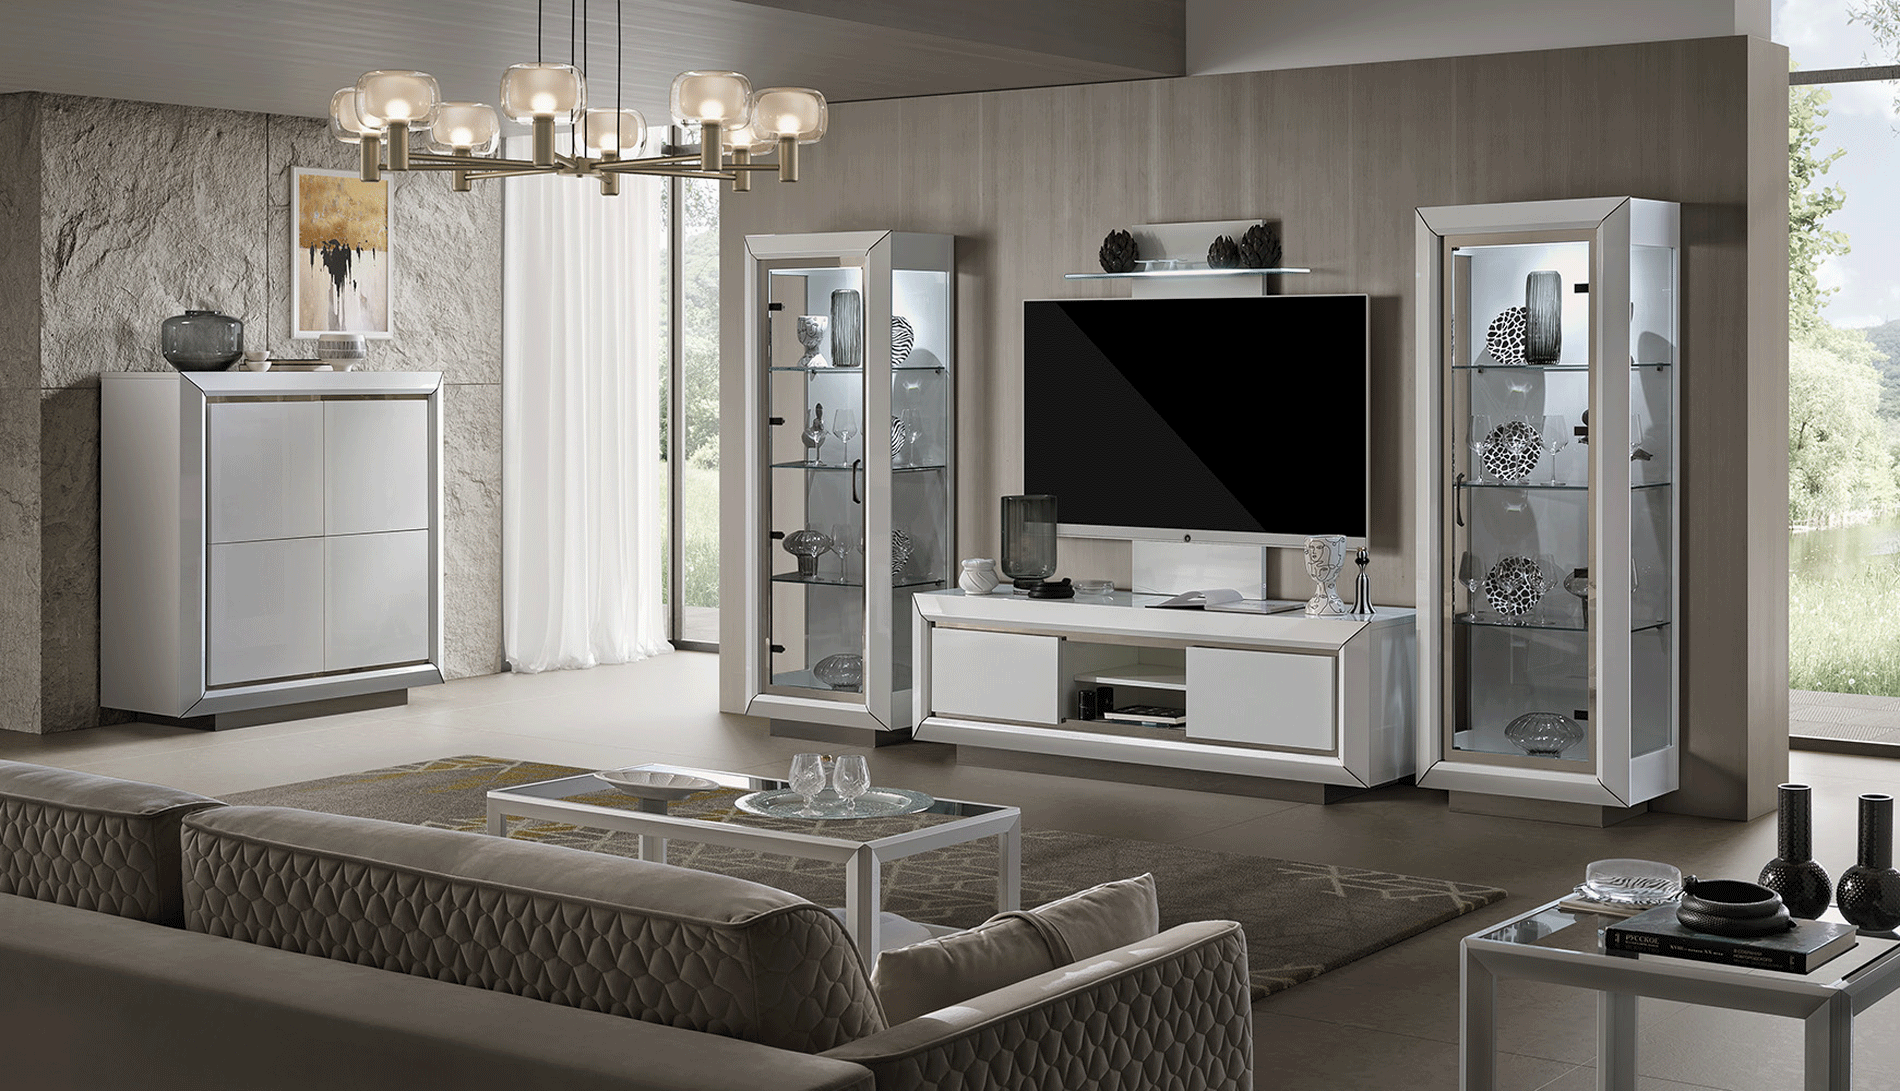 Dining Room Furniture Tables Elite WHITE Entertainment center Additional items